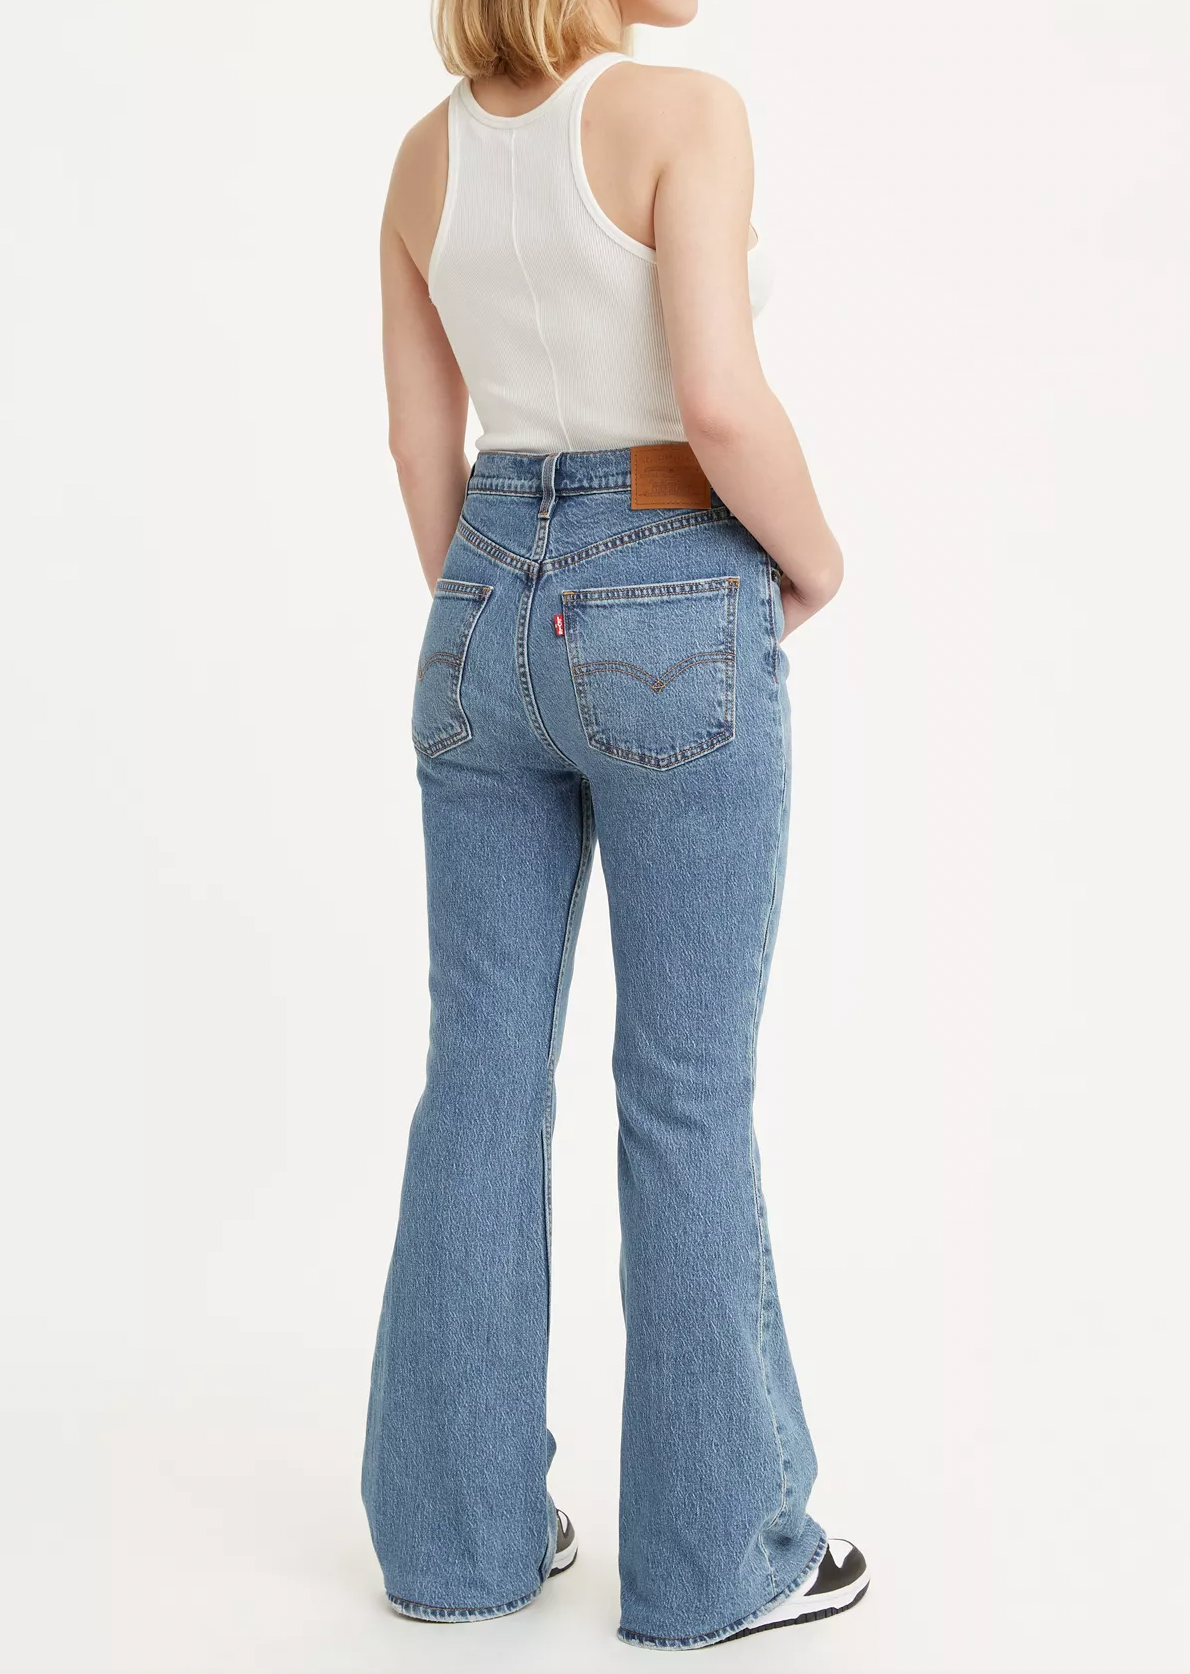 Levi's 70's High Rise Flare Women's Jeans - Maude